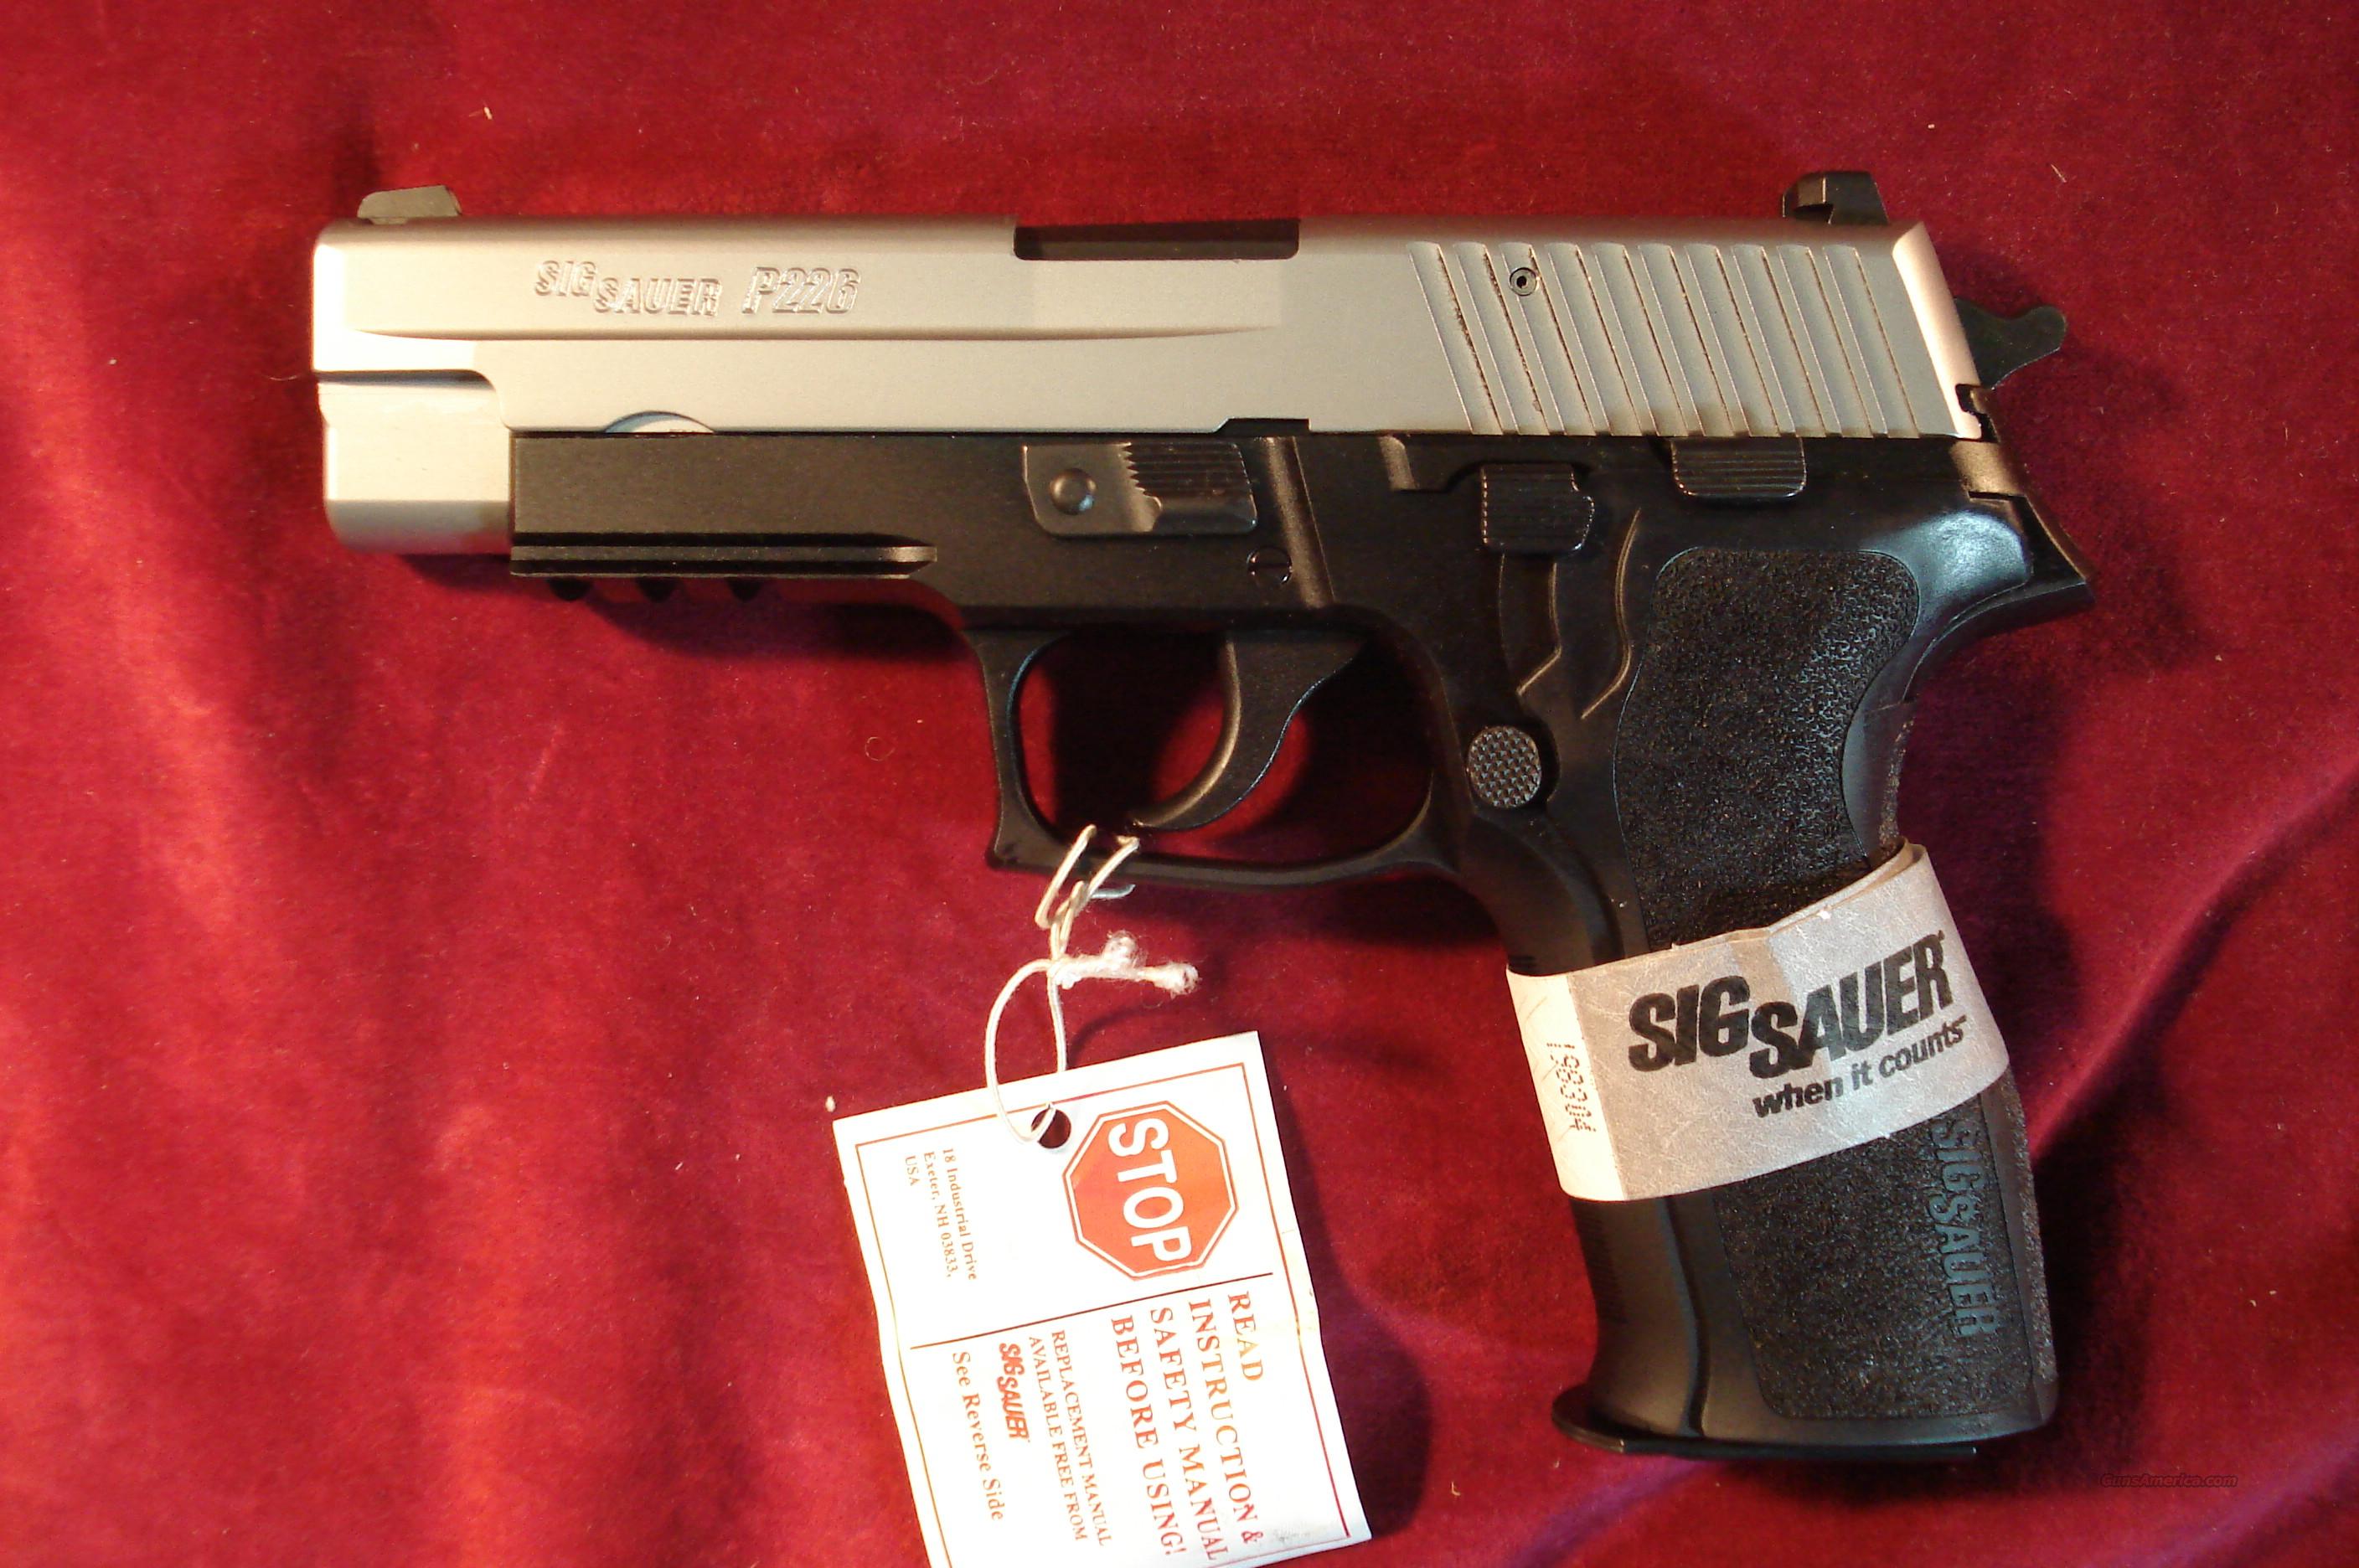 Sig Sauer P226 Two Tone 9mm Wnight For Sale At